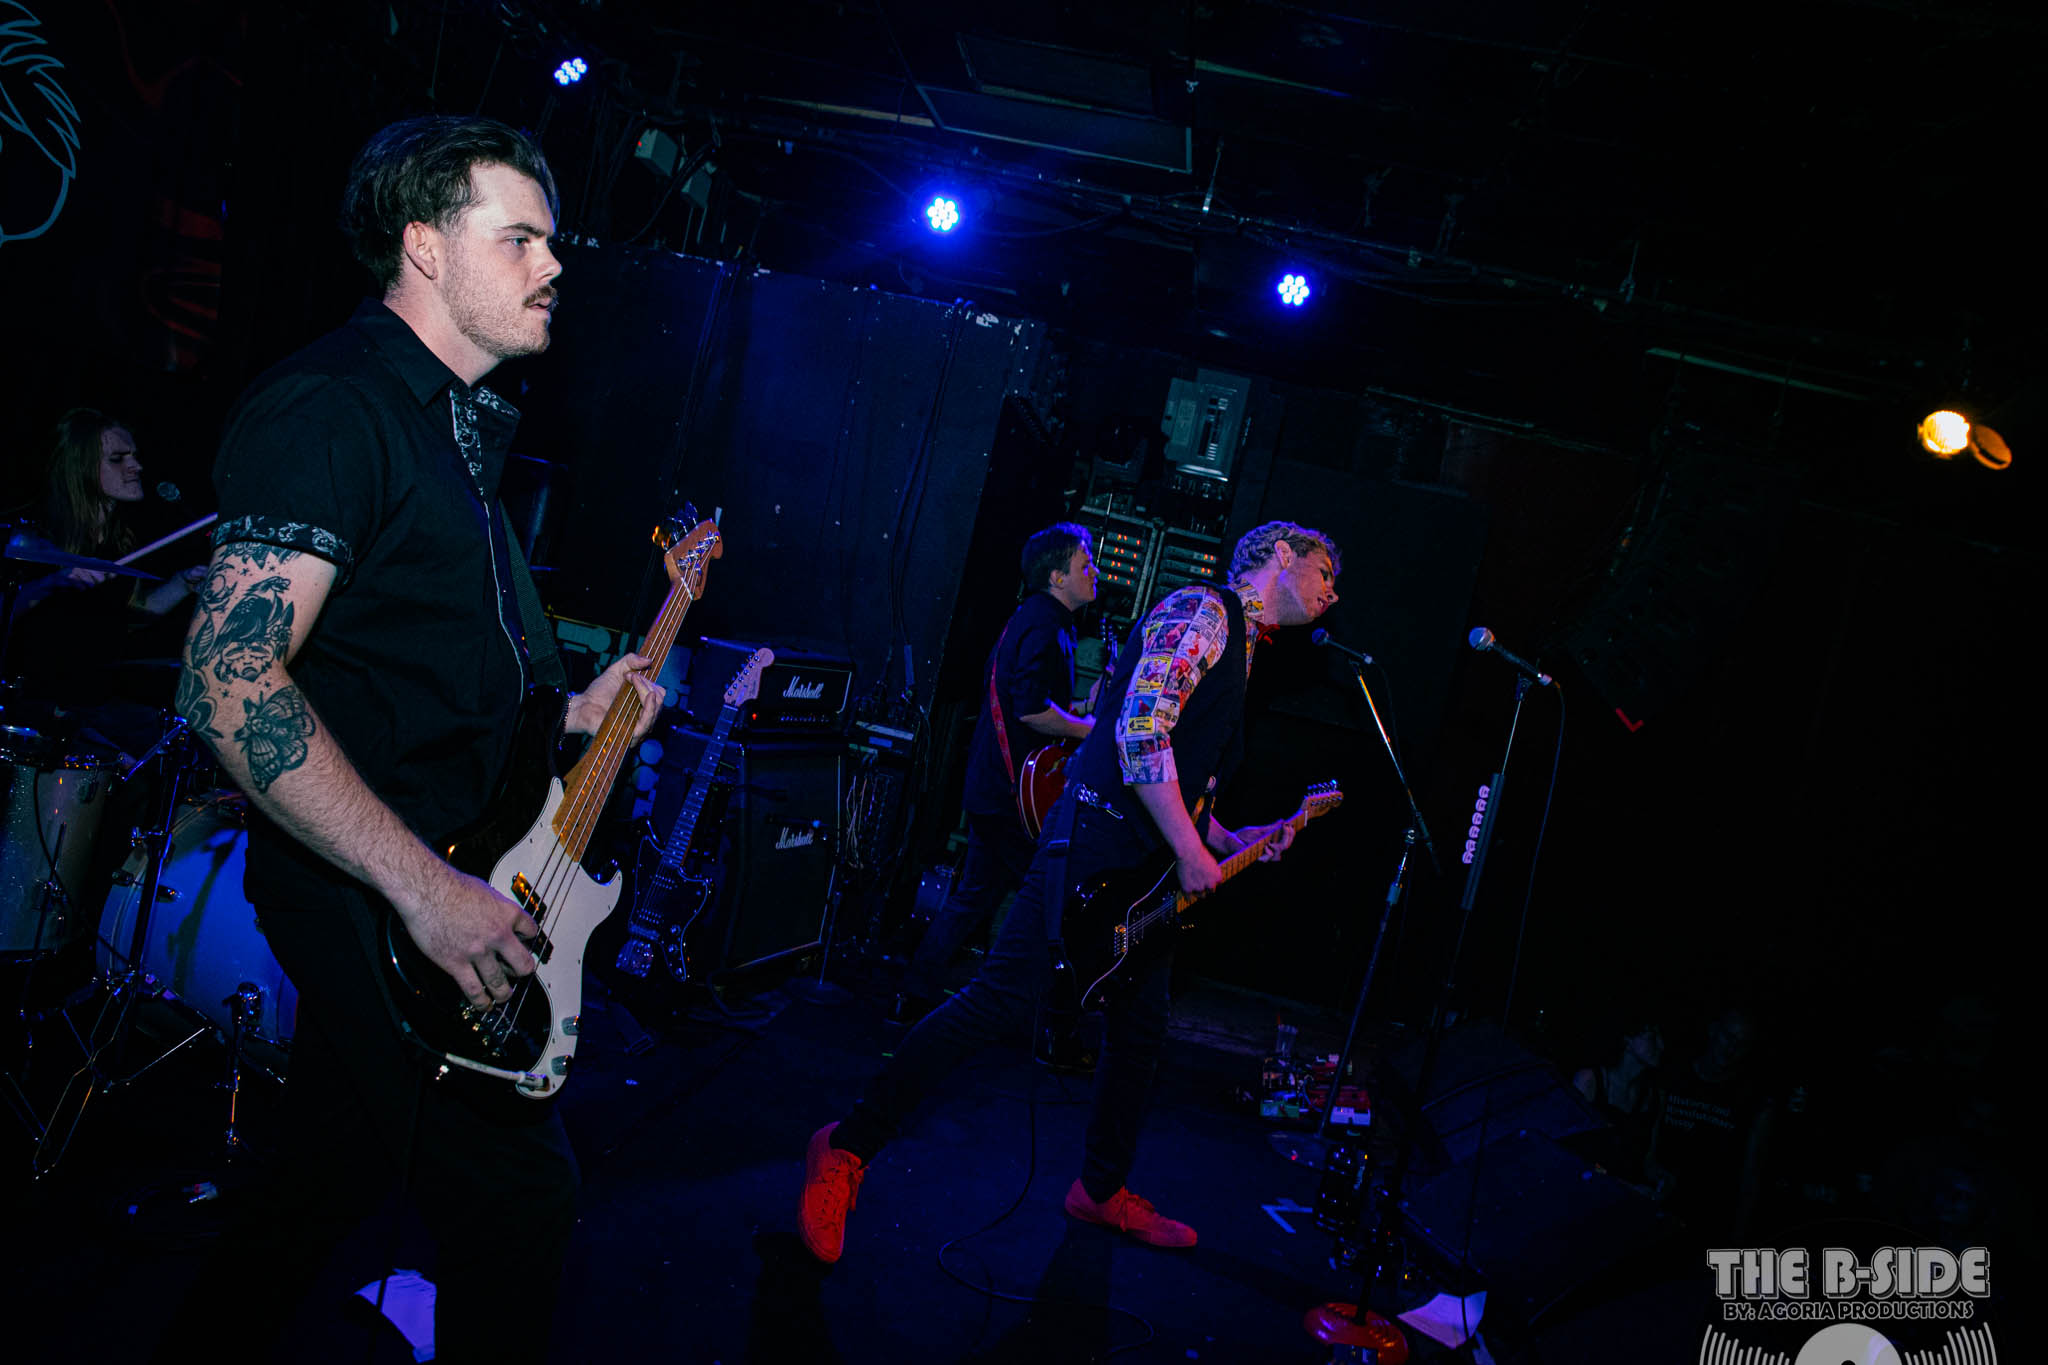 Bailey Skilton, Wes Bertram, Nick and Fluffio performing live with The RPC at Lee's Palace in Toronto